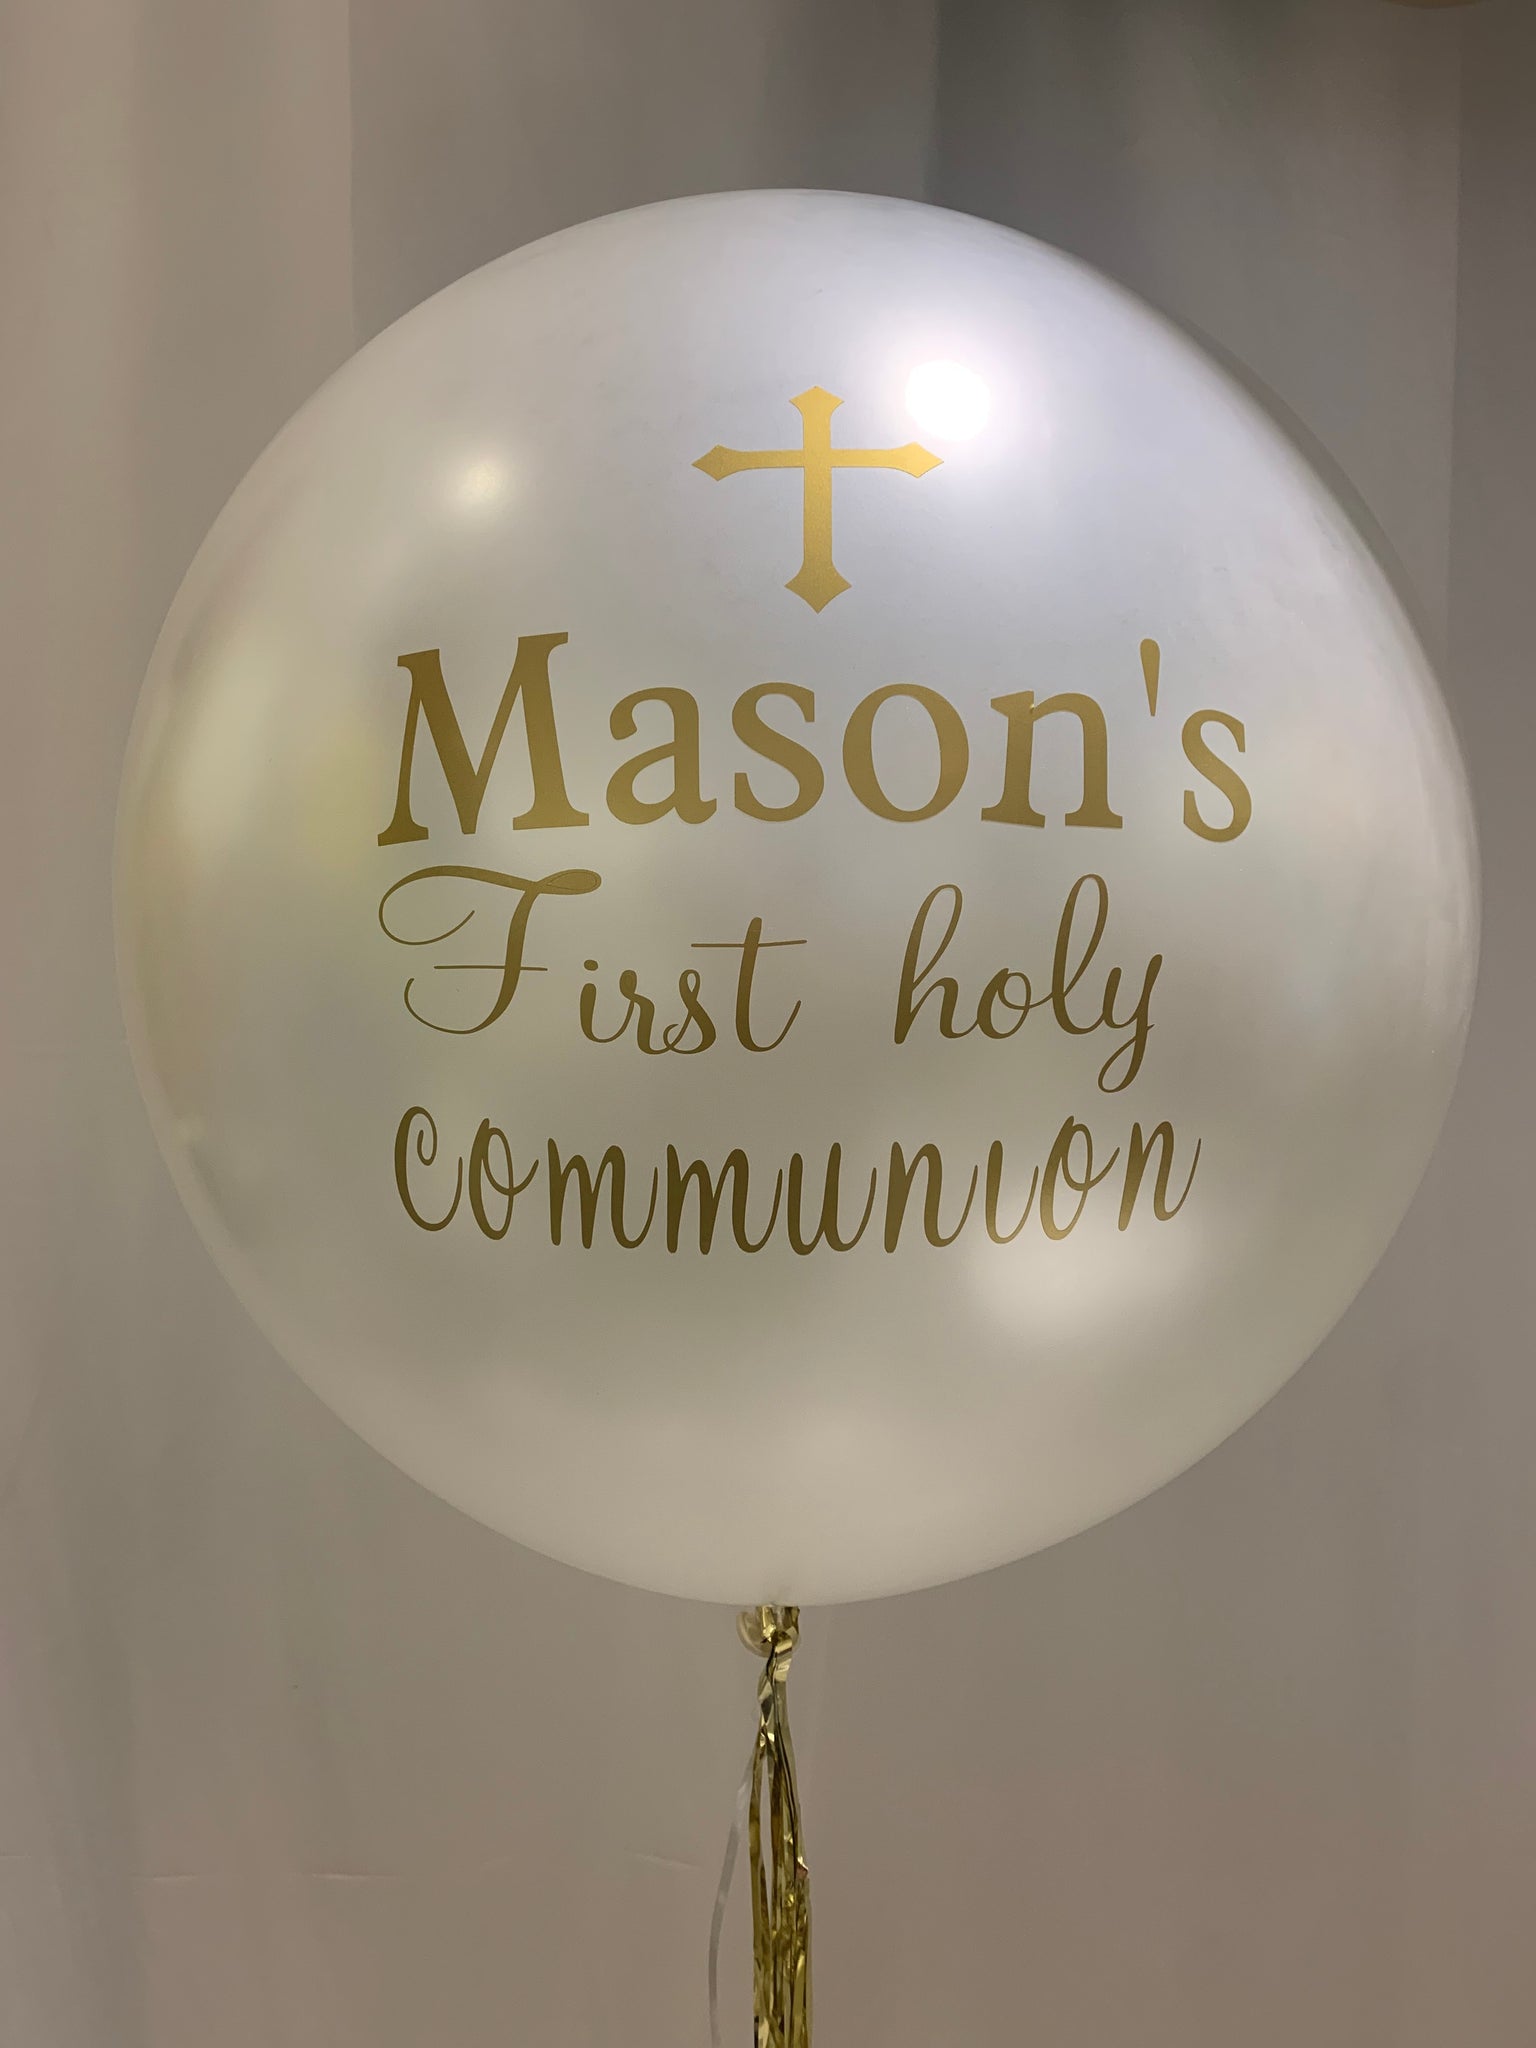 First communion personalized balloon 24